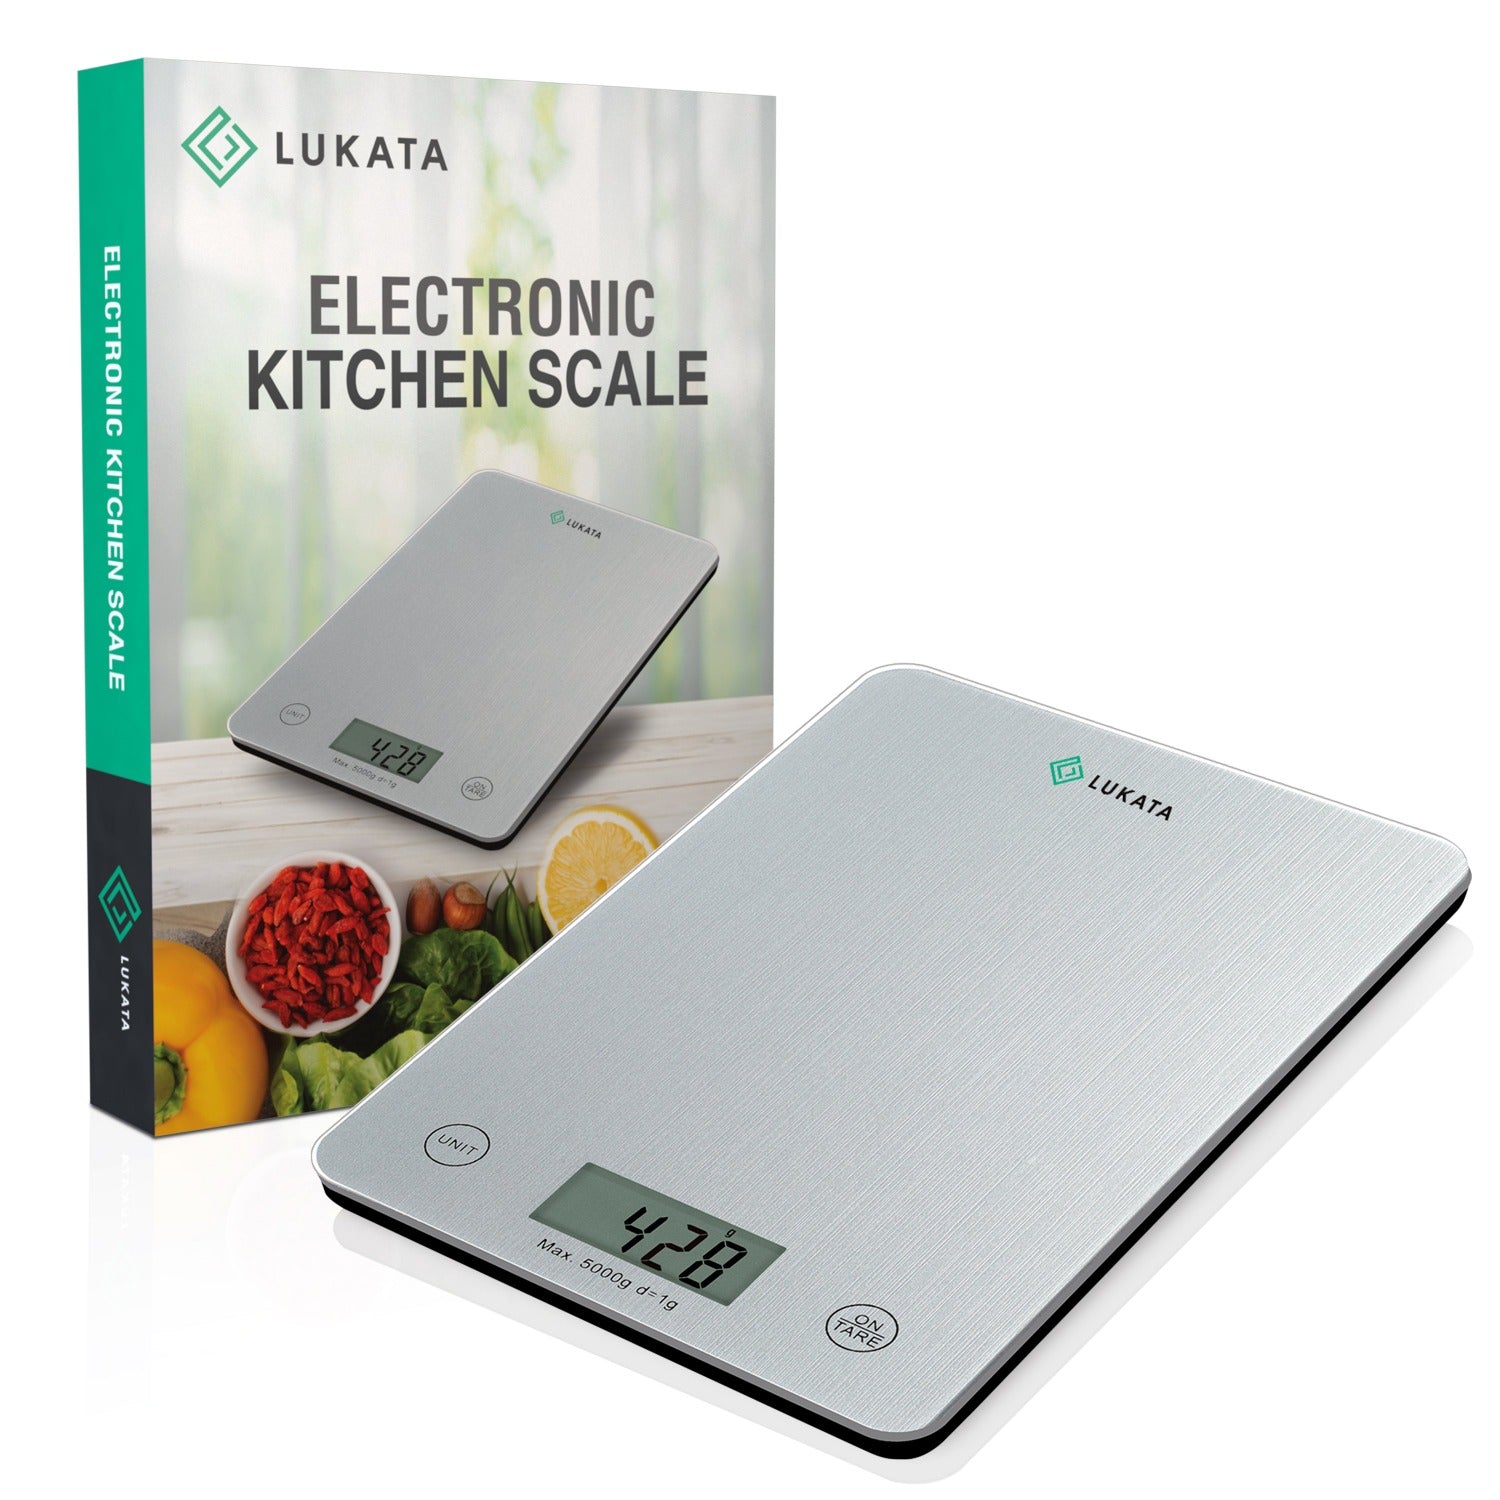 Lukata Kitchen Scale - Multifunctional Food Scale, Cooking & Baking - Precision Tempered Glass Electronic Weighing Scale in Grams oz lb ml Lukata